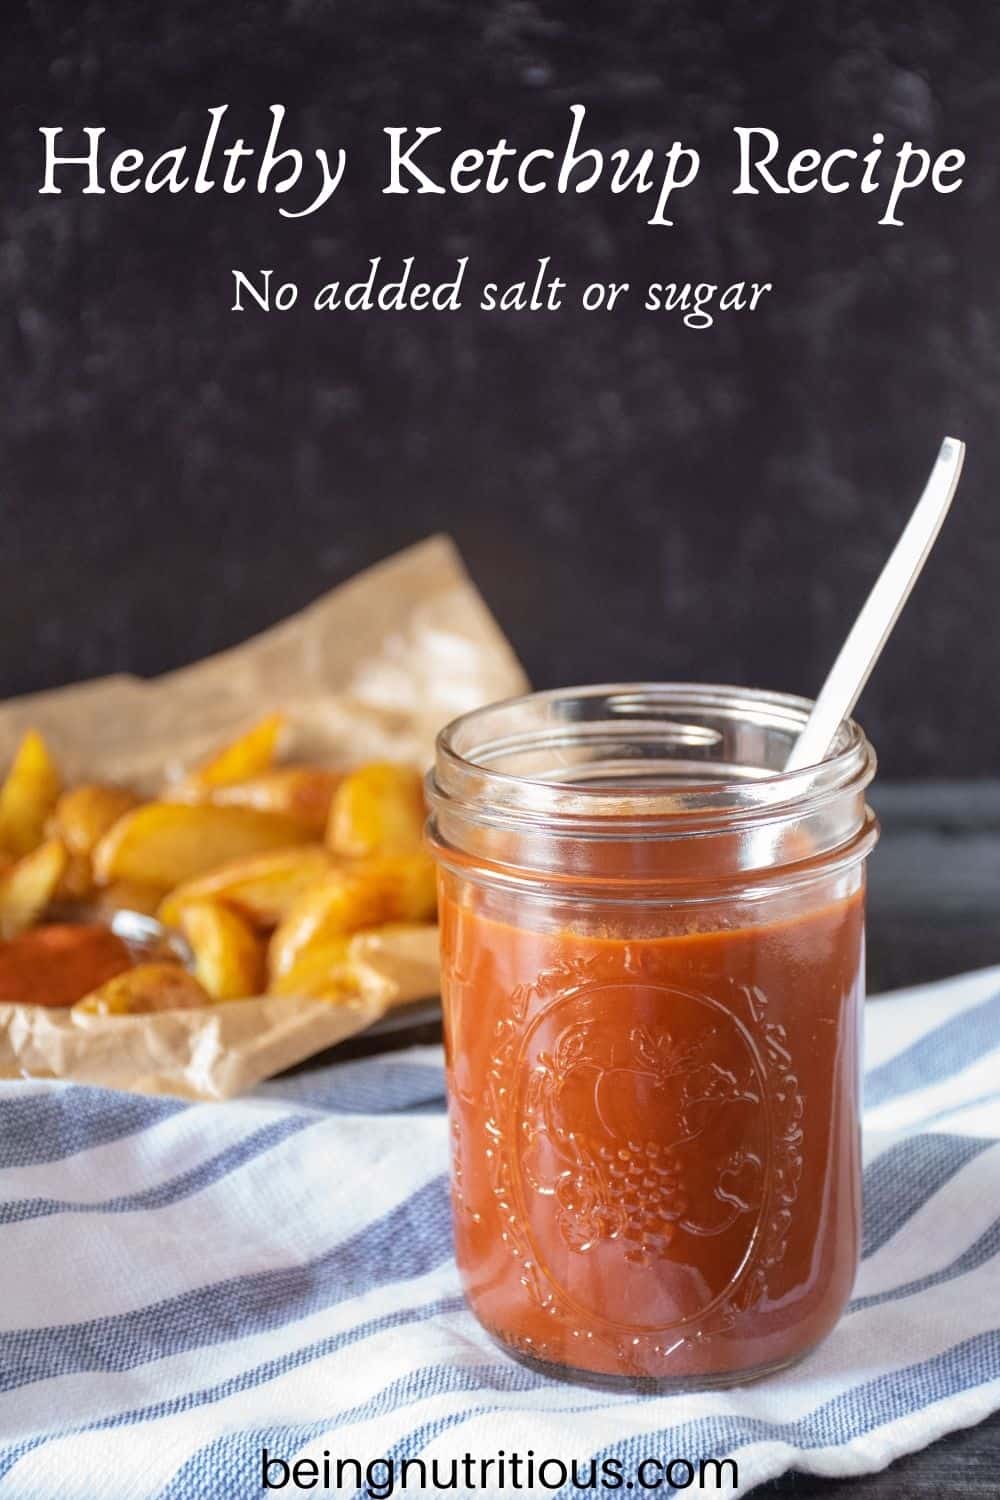 Jar of ketchup, with basket of potato wedges behind. Text overlay: Healthy Ketchup Recipe; no added salt or sugar.